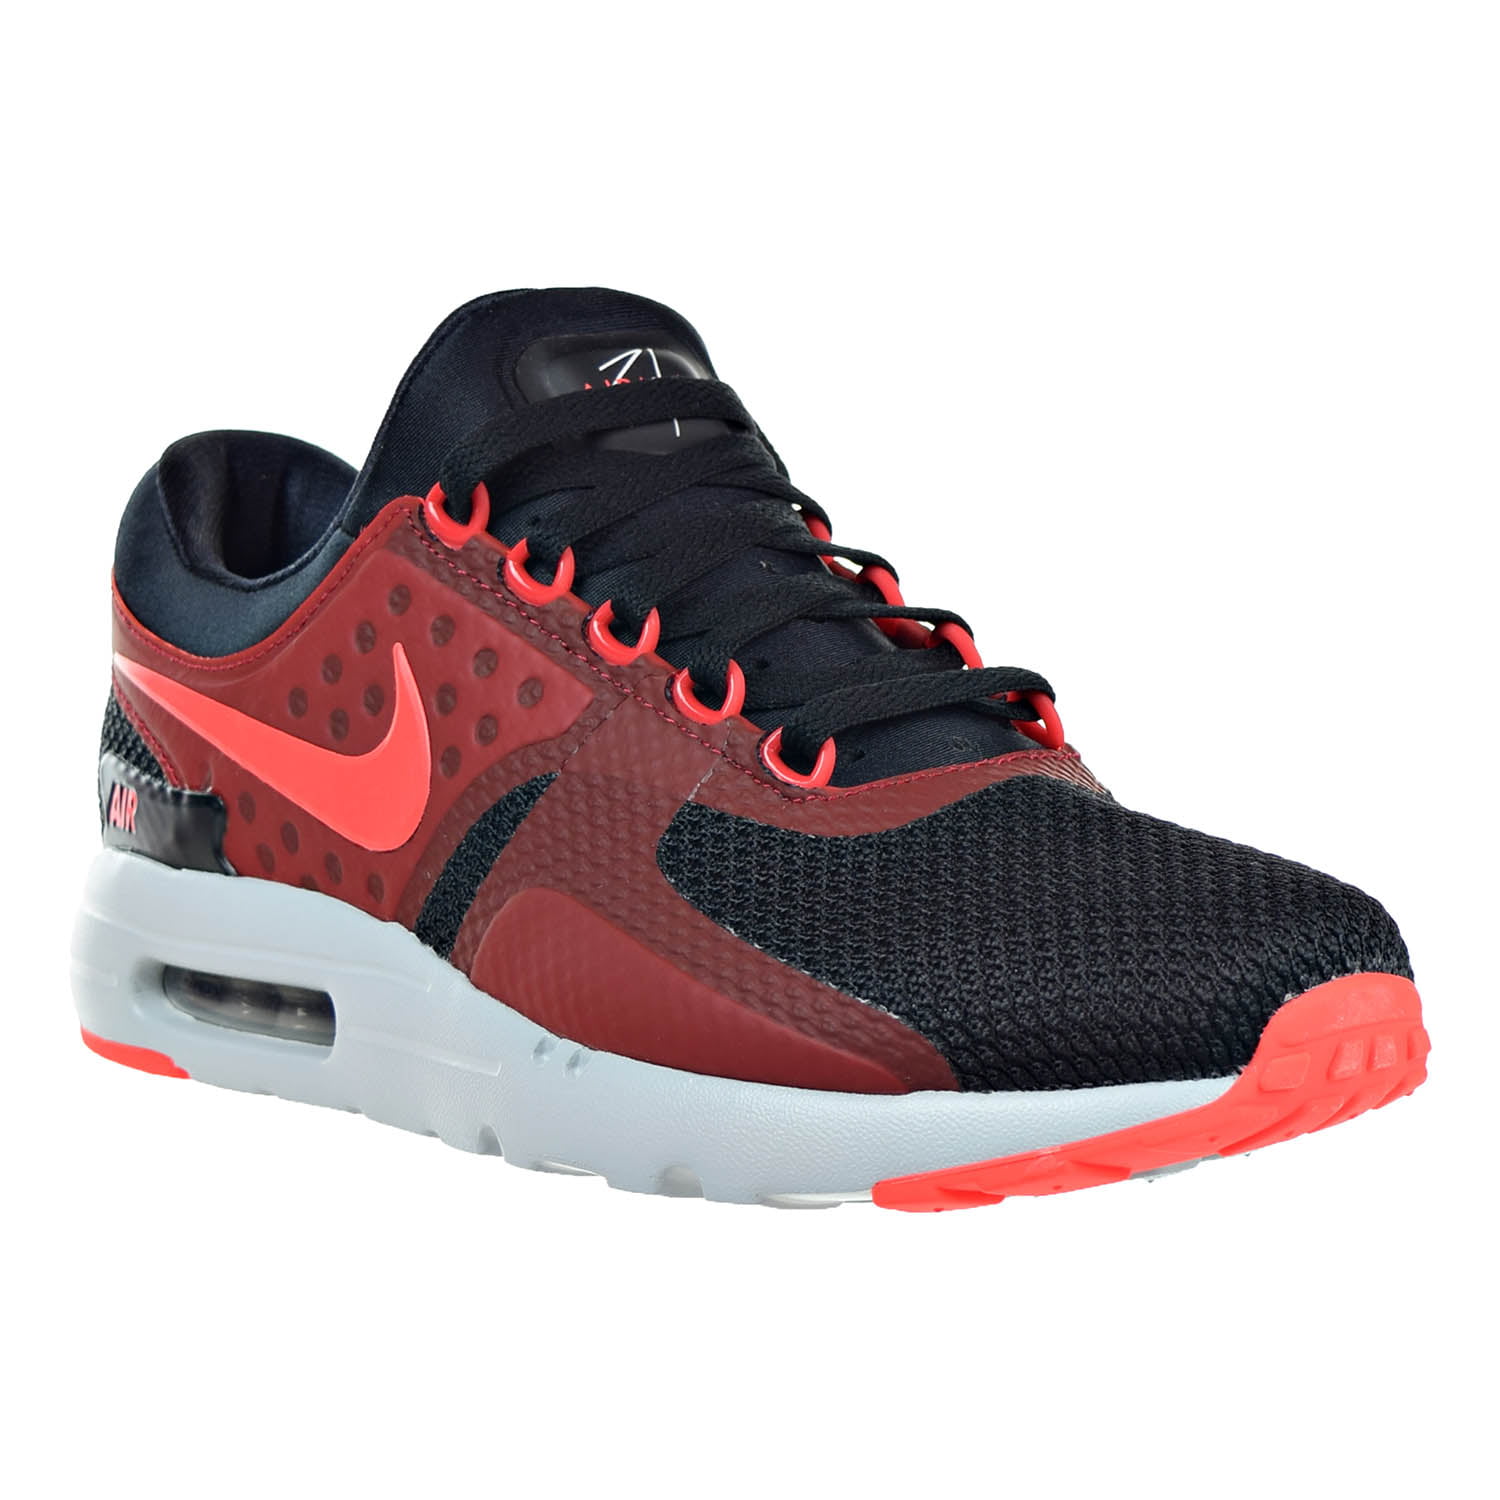 Nike Air Max Zero Essential Men Limited Edition Sneaker Shoe 876070-100  Size 14